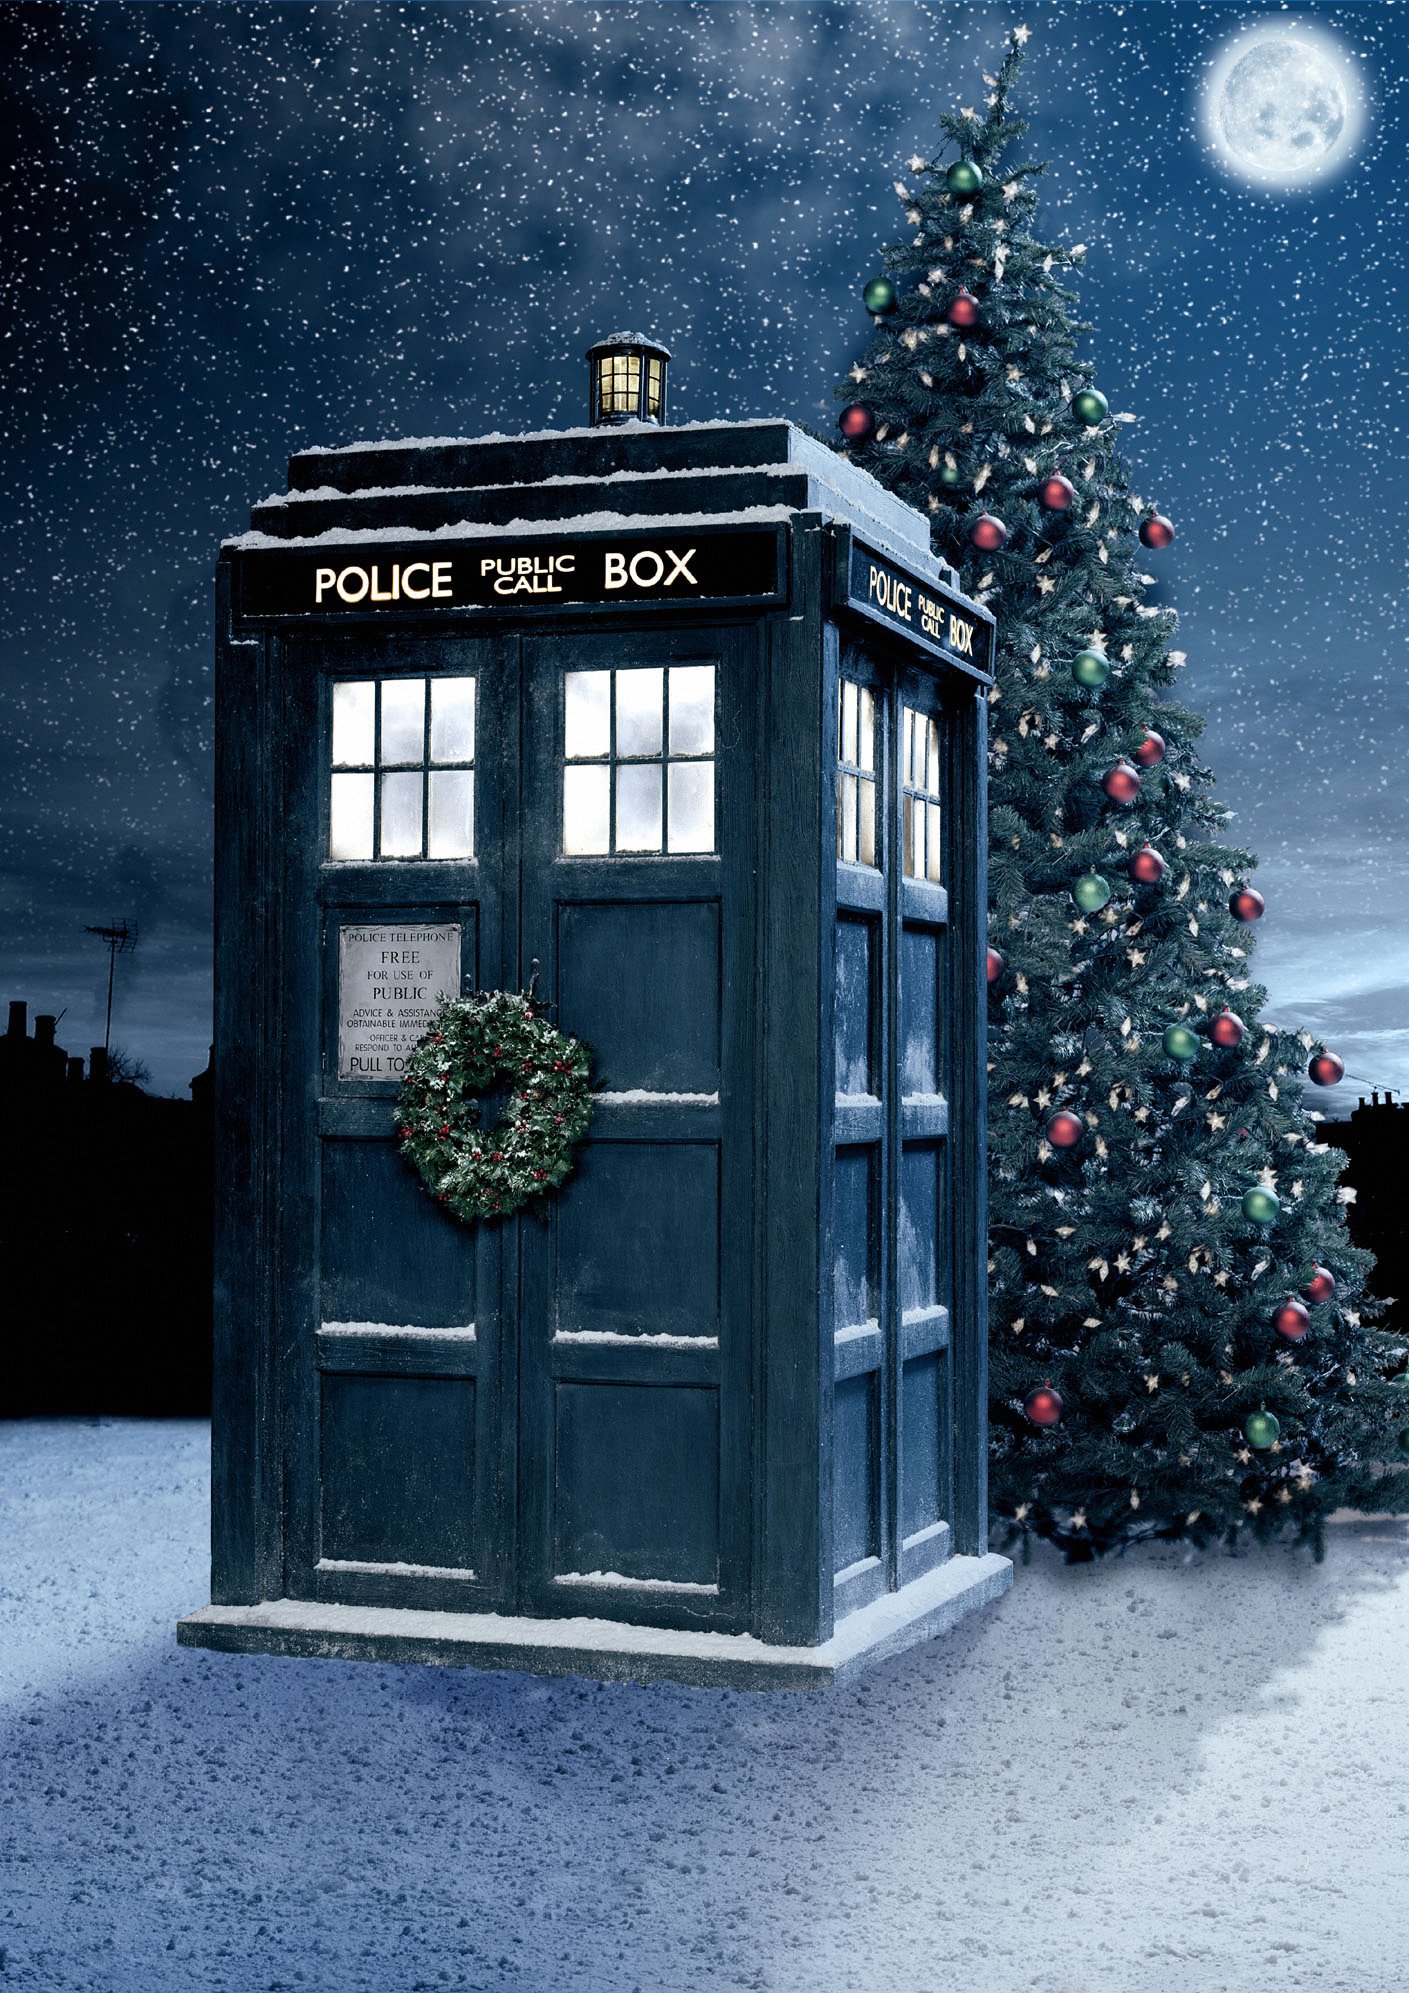 Doctor Who - The Doctor lands on Christmas Day in The Church on Ruby Road